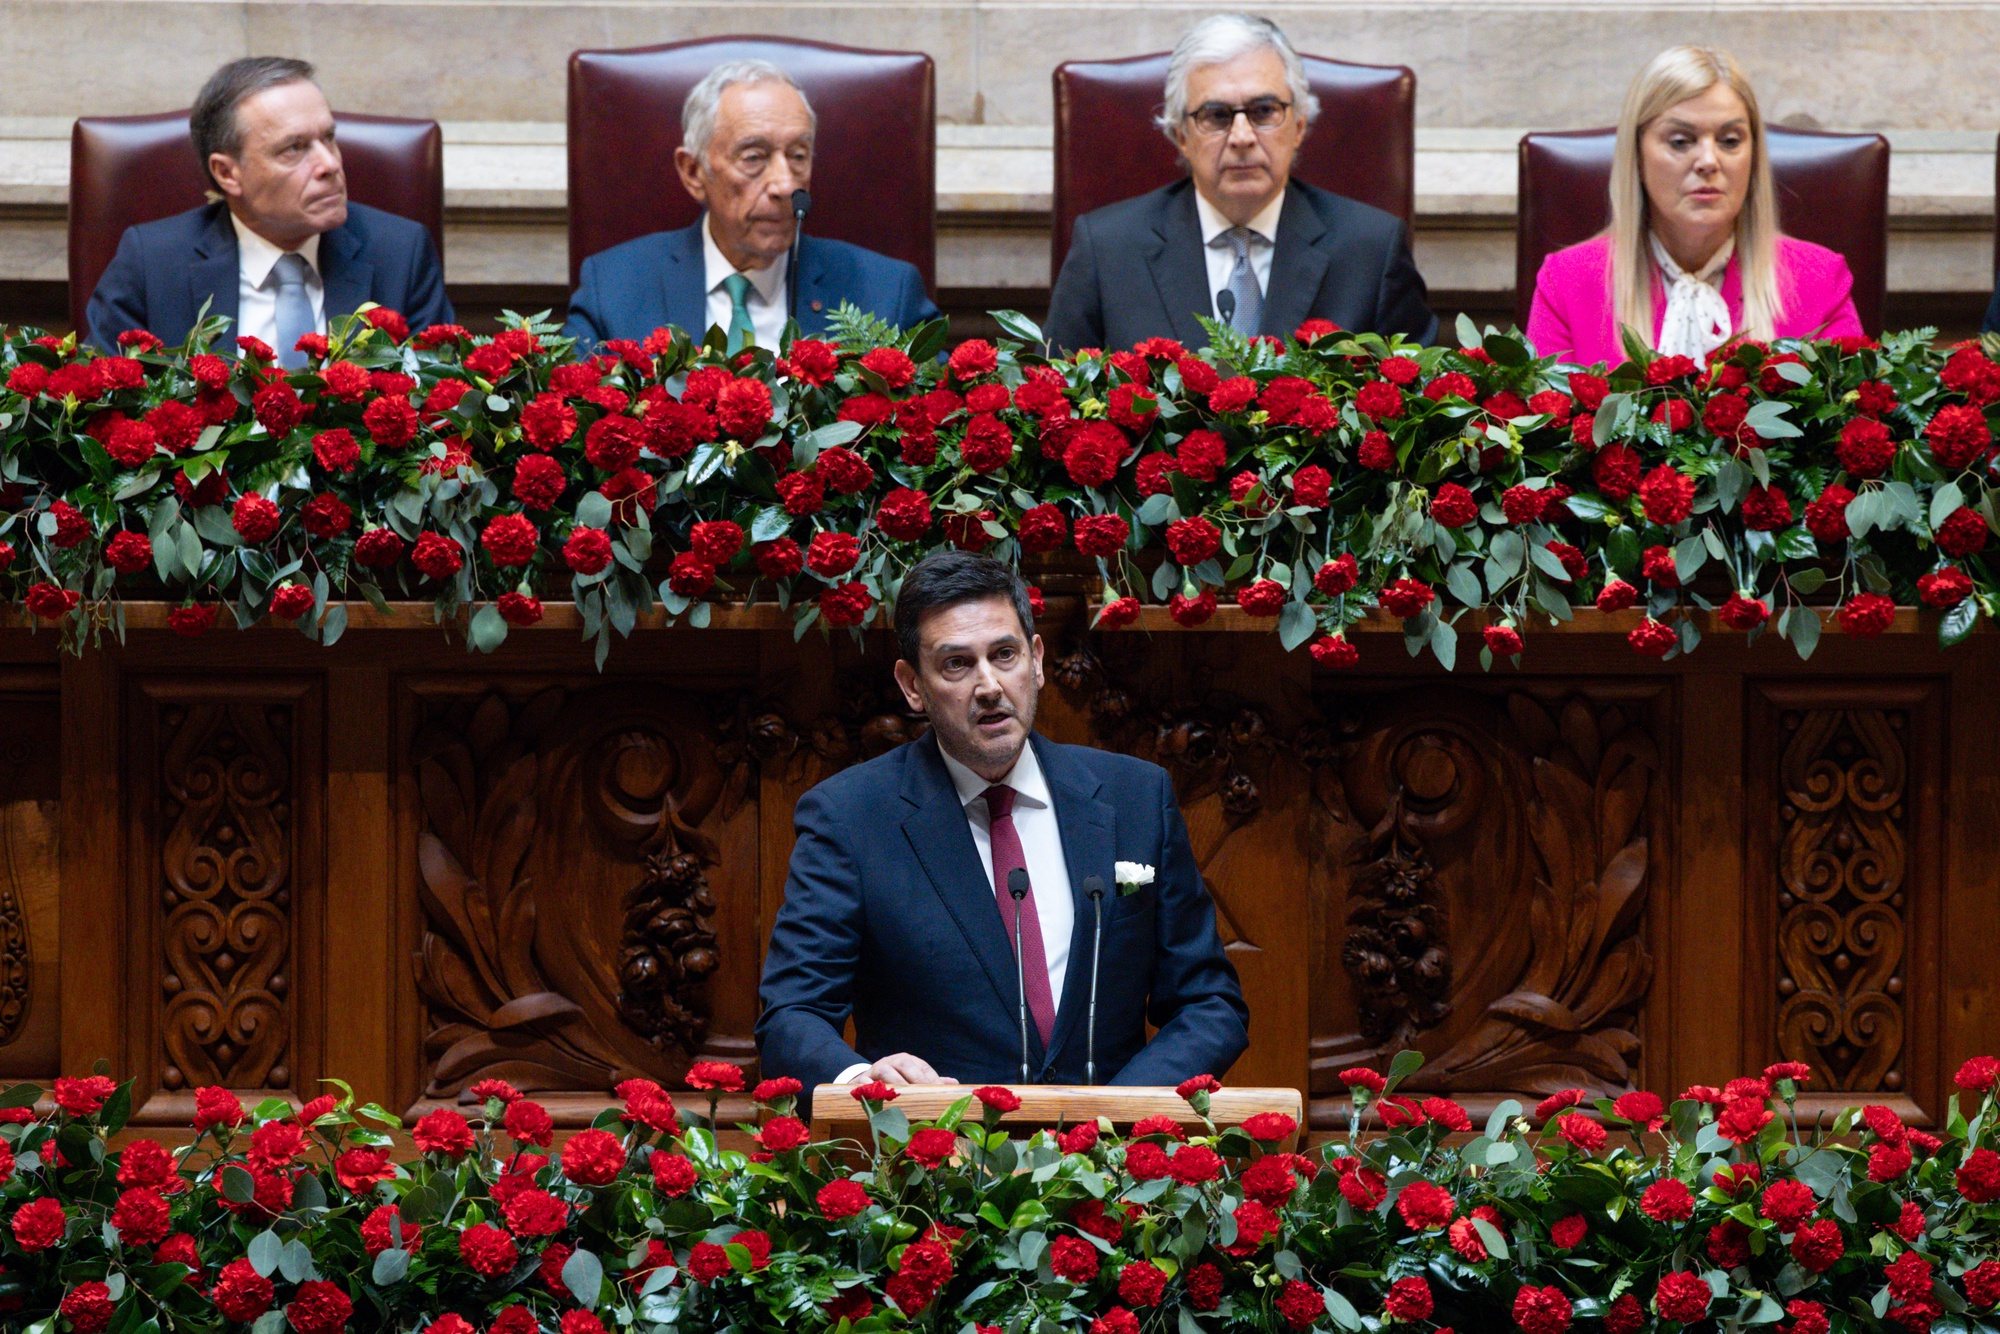 Portuguese leader of the Liberal Initiative (IL), Rui Rocha, delivers a speech during the solemn comemorative session at the Portuguese parliament in Lisbon, Portugal, 25 April 2024. Portugal celebrates the 50th anniversary of the Carnation Revolution that ended the authoritarian regime of Estado Novo (New State) that ruled the country between 1926 to 1974. JOSE SENA GOULAO/LUSA